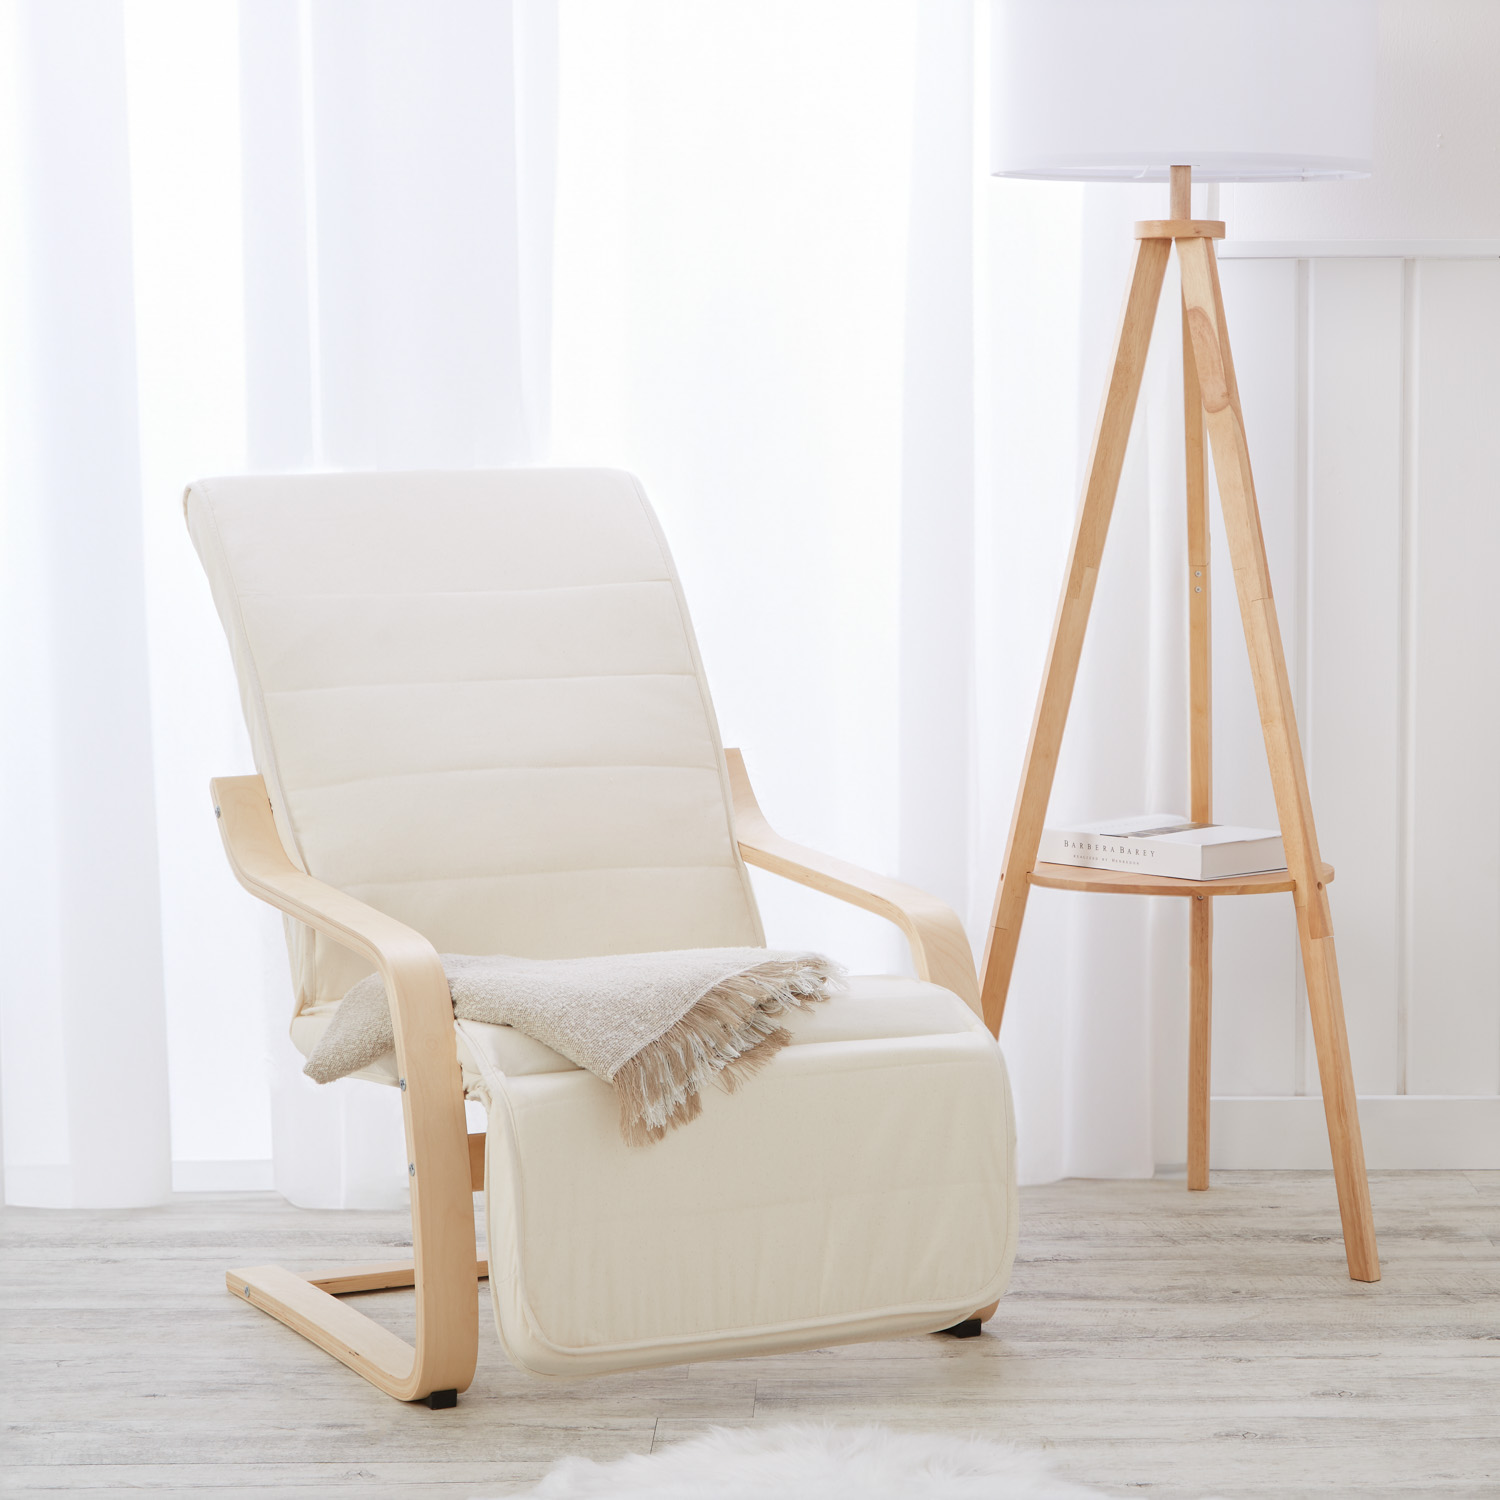 Recliner chair with footrest Natural Nursing chair Chaise lounge Eames chair Armchair